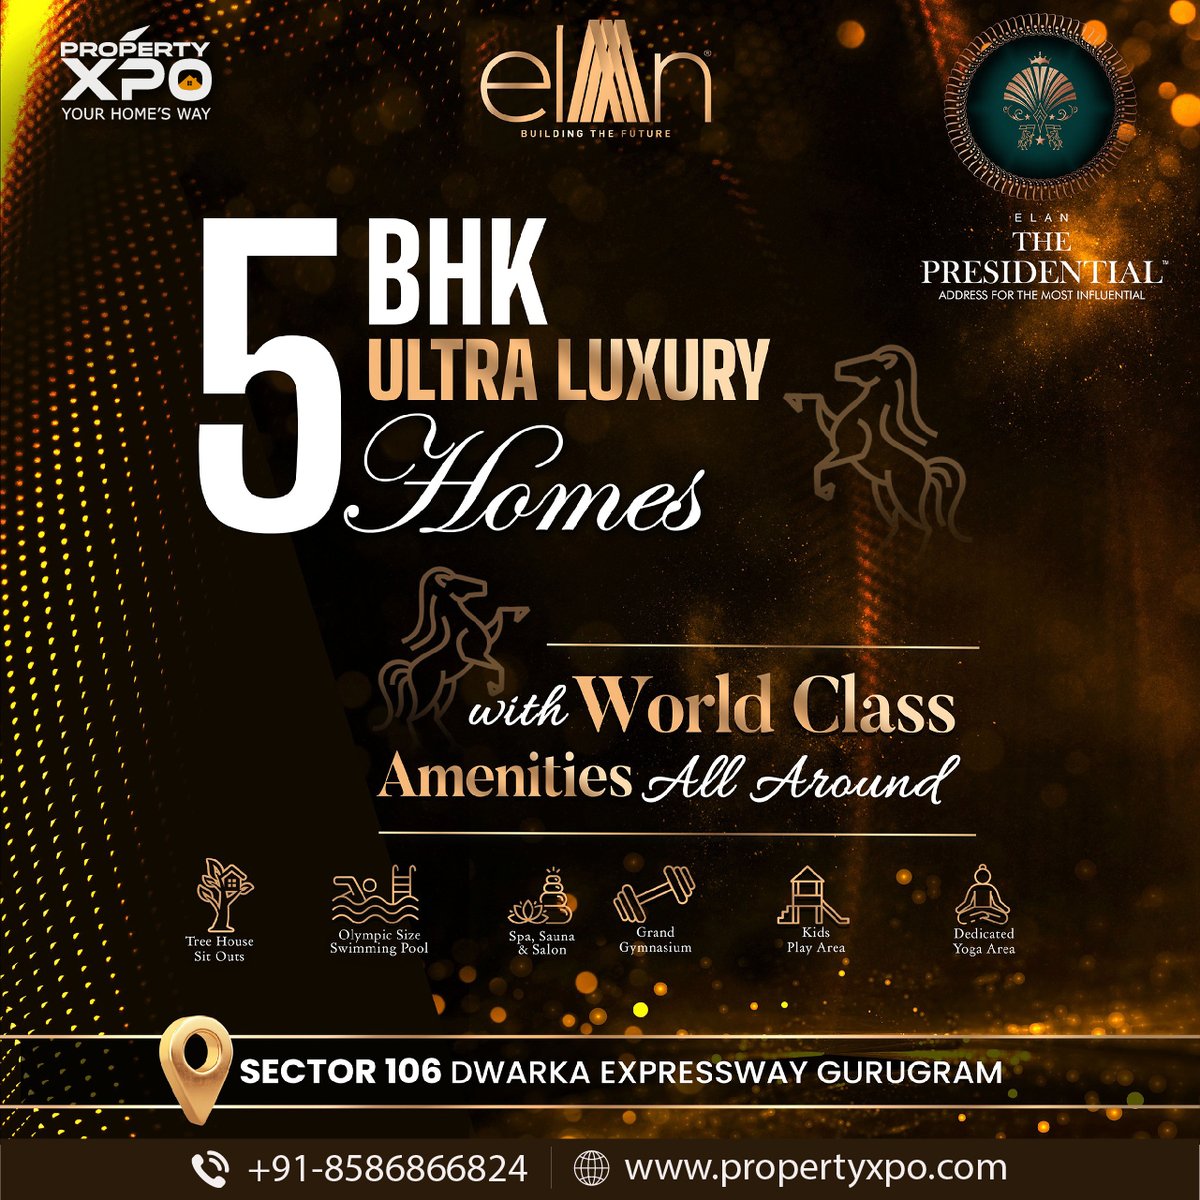 Visit Now: Visit Now : propertyxpo.com/elan-the-presi…
Call us: 8586866824 & Follow: Propertyxpo.com
Elan The Presidential - The Rise of Dwarka Expressway
Elan The Presidential is a posh housing development with all the newest amenities.
#elanthepredential #elan #ElanGroup